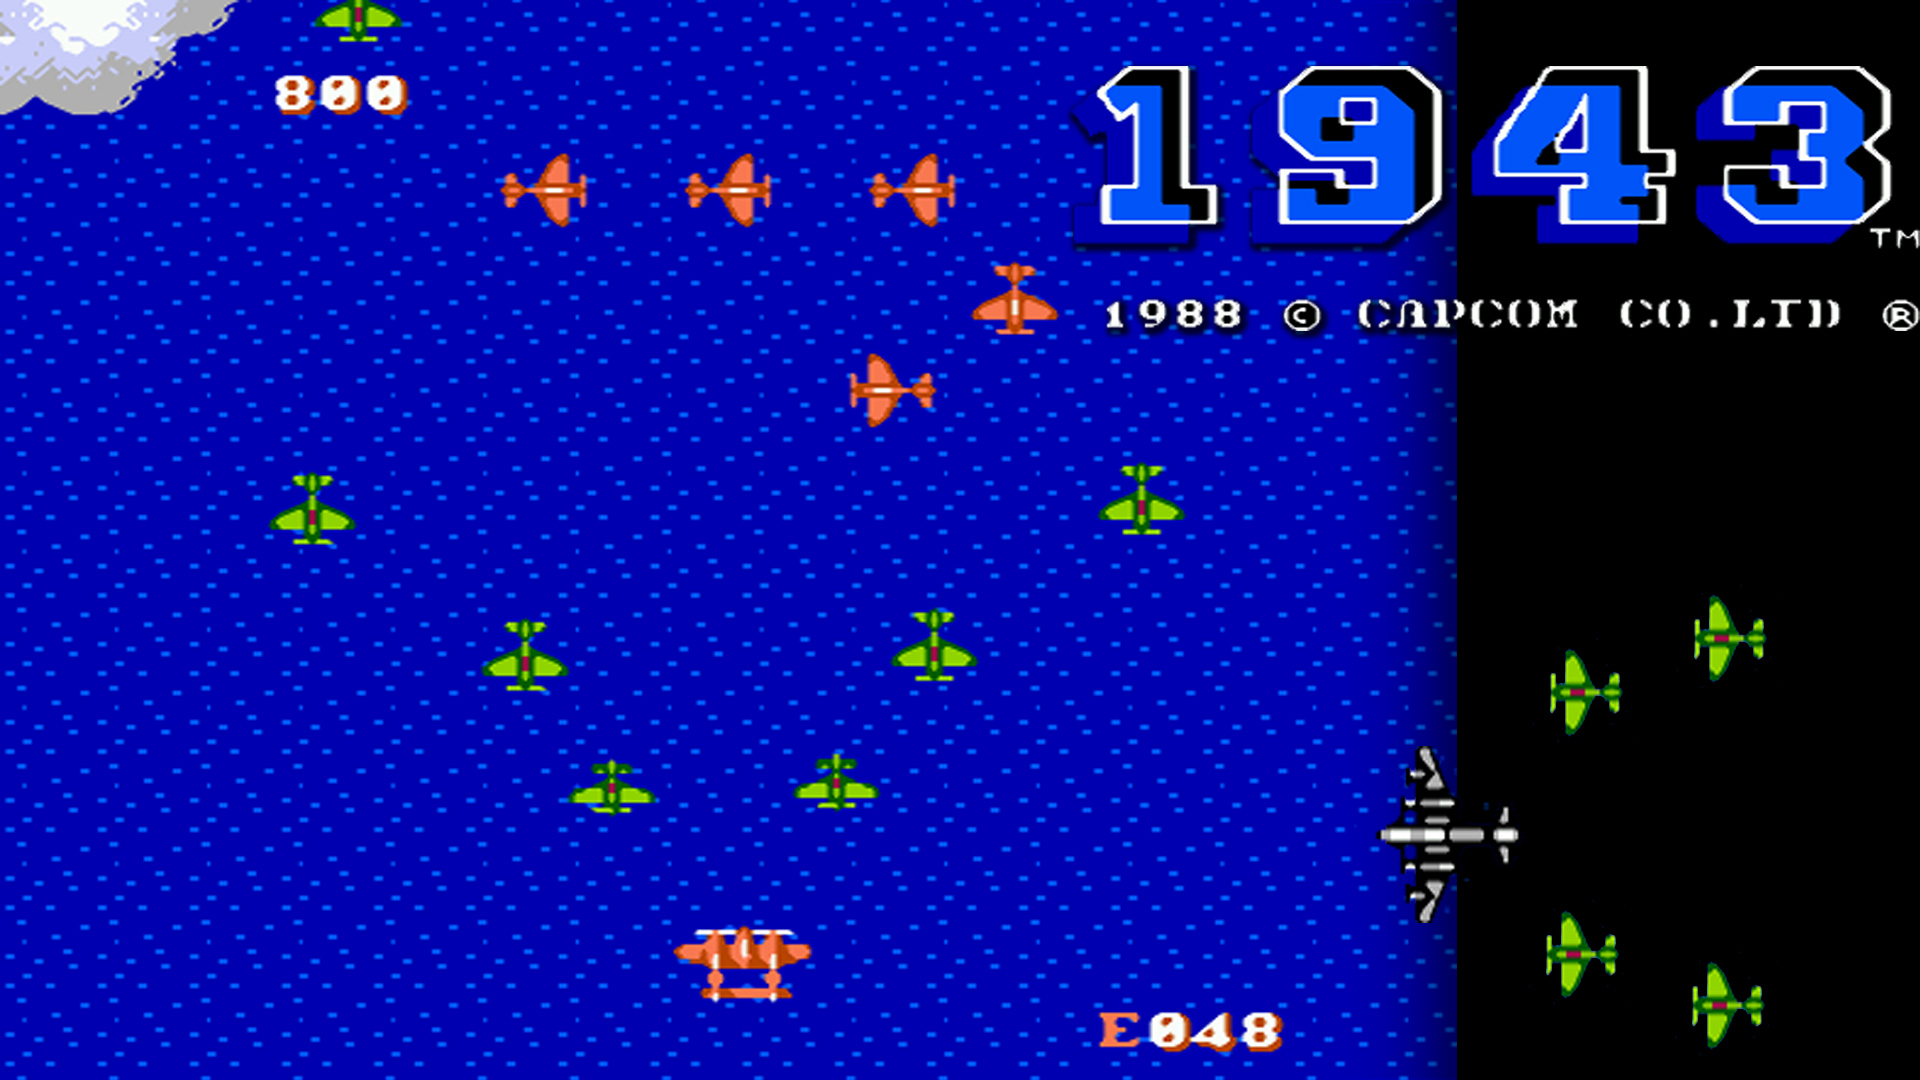 video game, 1943: the battle of midway